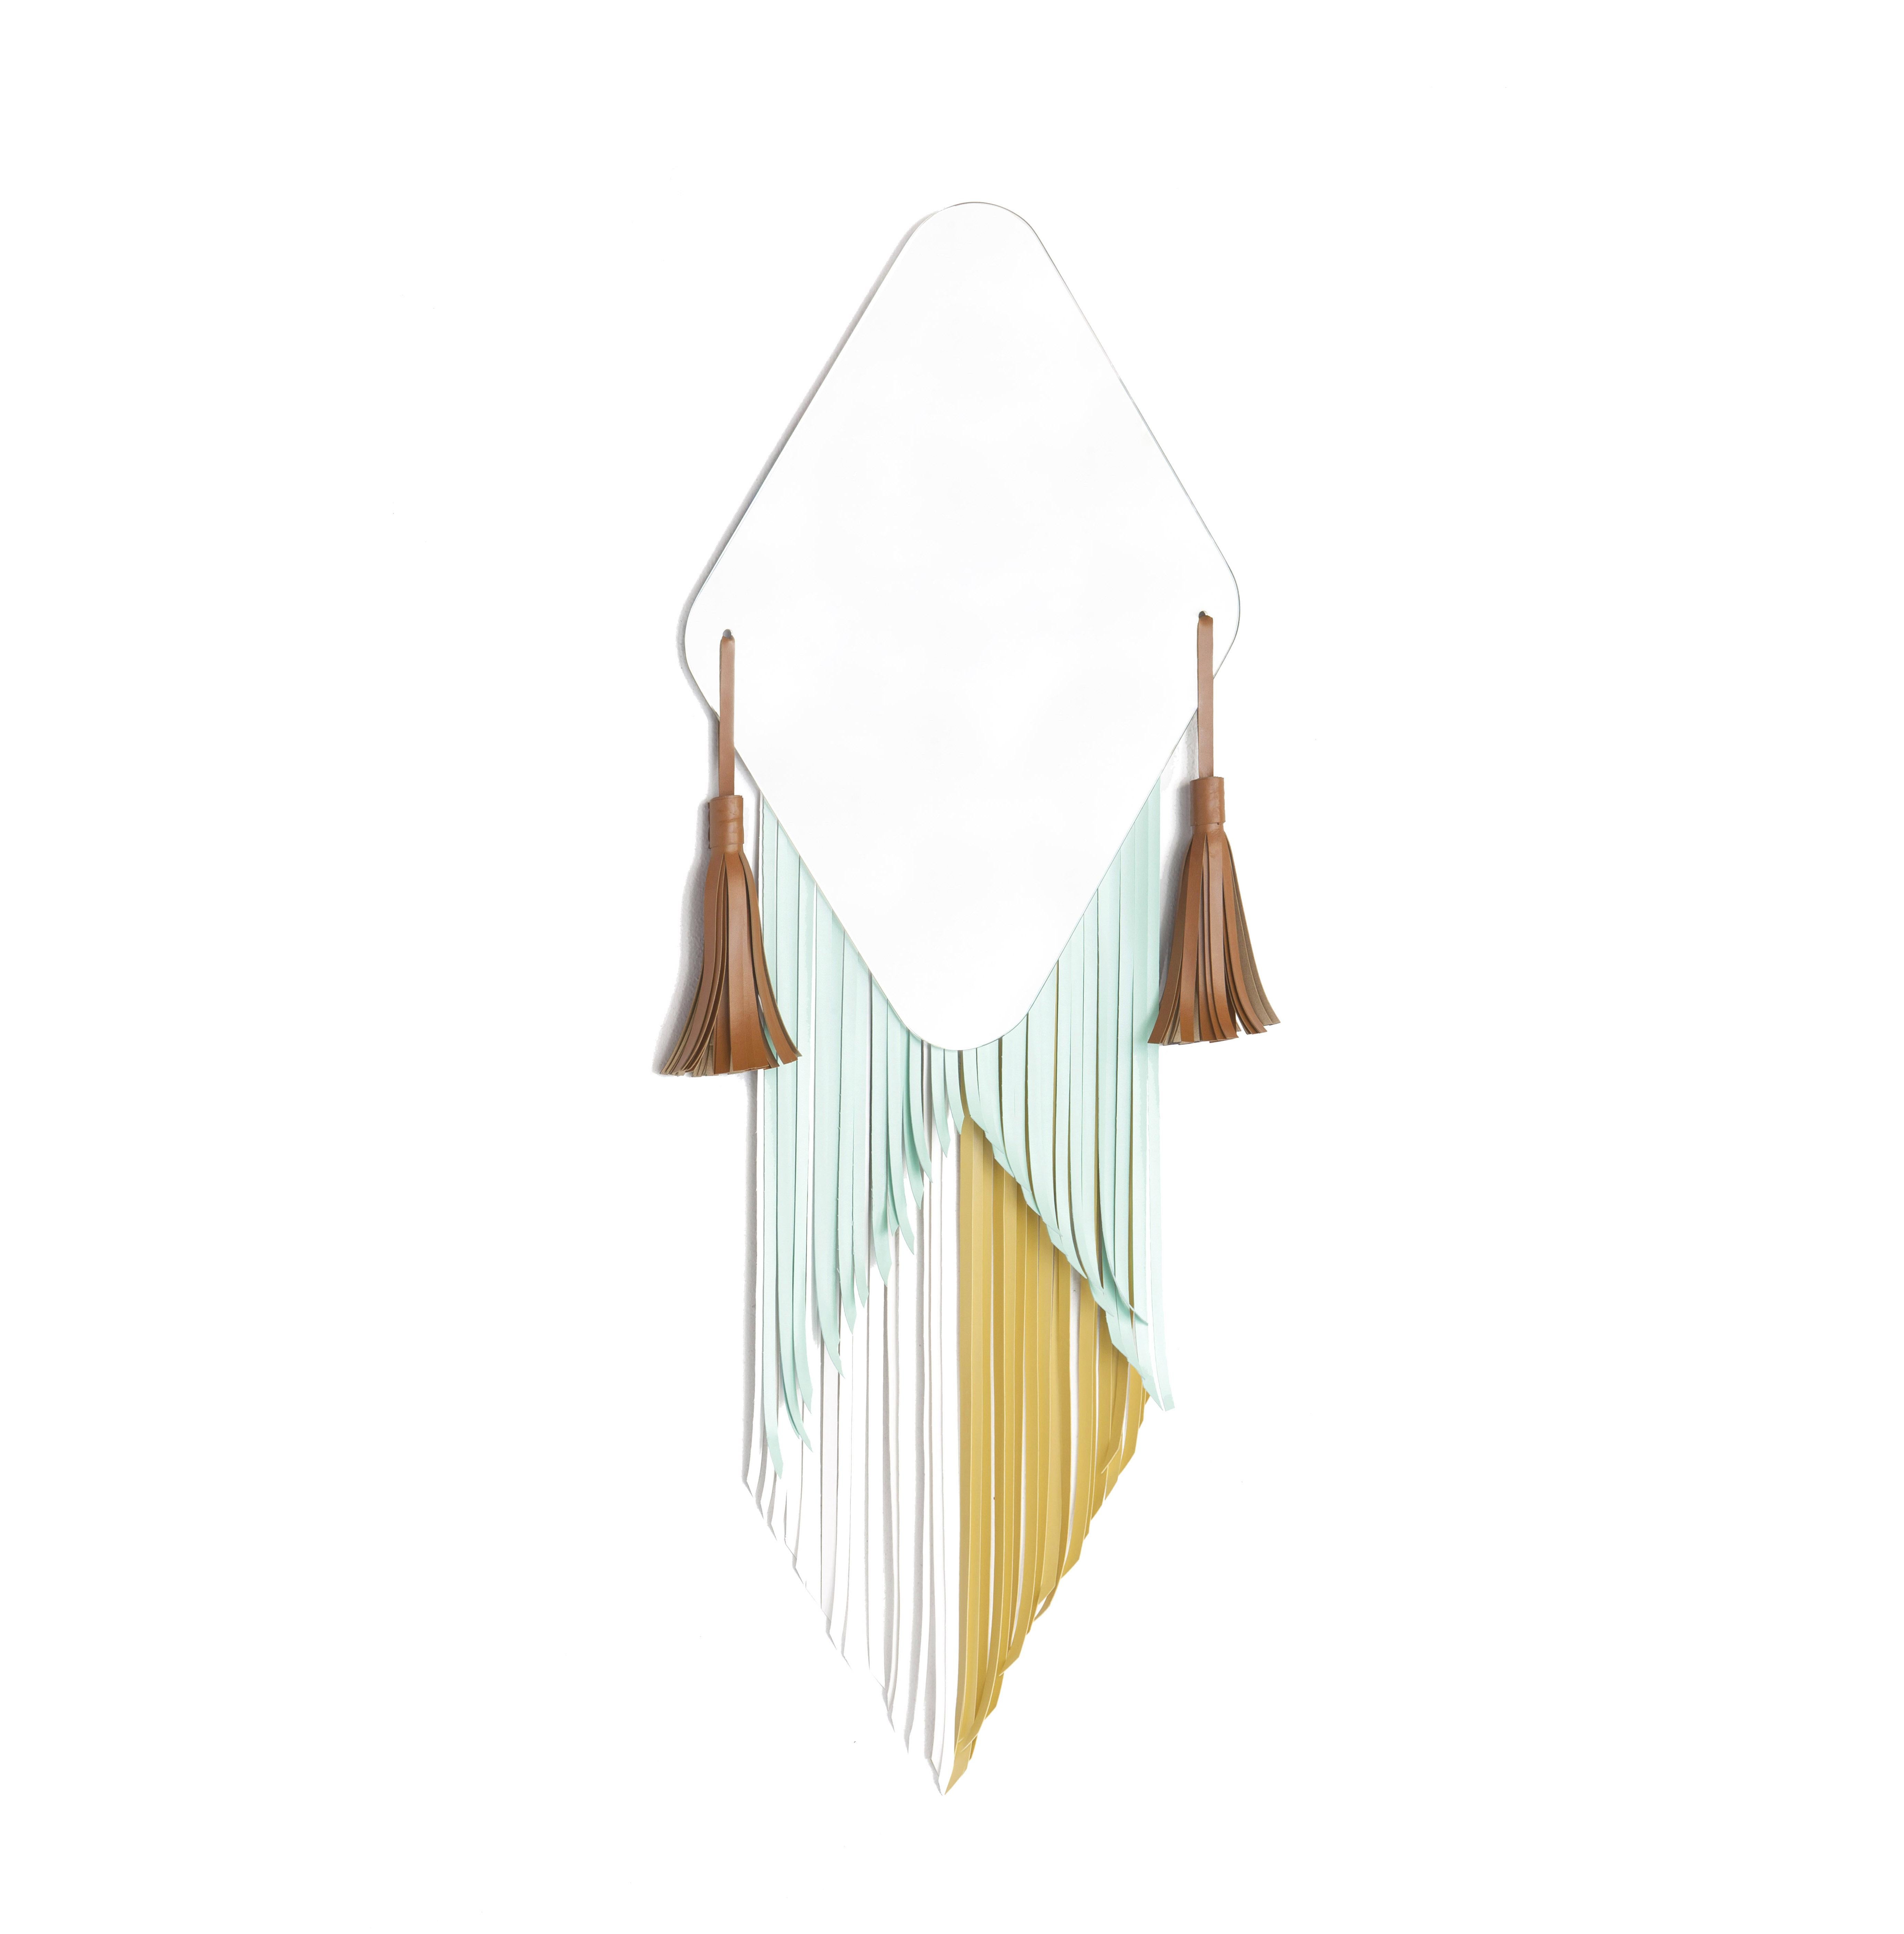 Masai diamond mirror by Serena Confalonieri
Dimensions: 42 x 60 cm
Materials: Mirror, faux leather decorations
Faux leather colors: Water blue, yellow, white and natural brown

Diamond mirror with faux leather decorations.

Serena